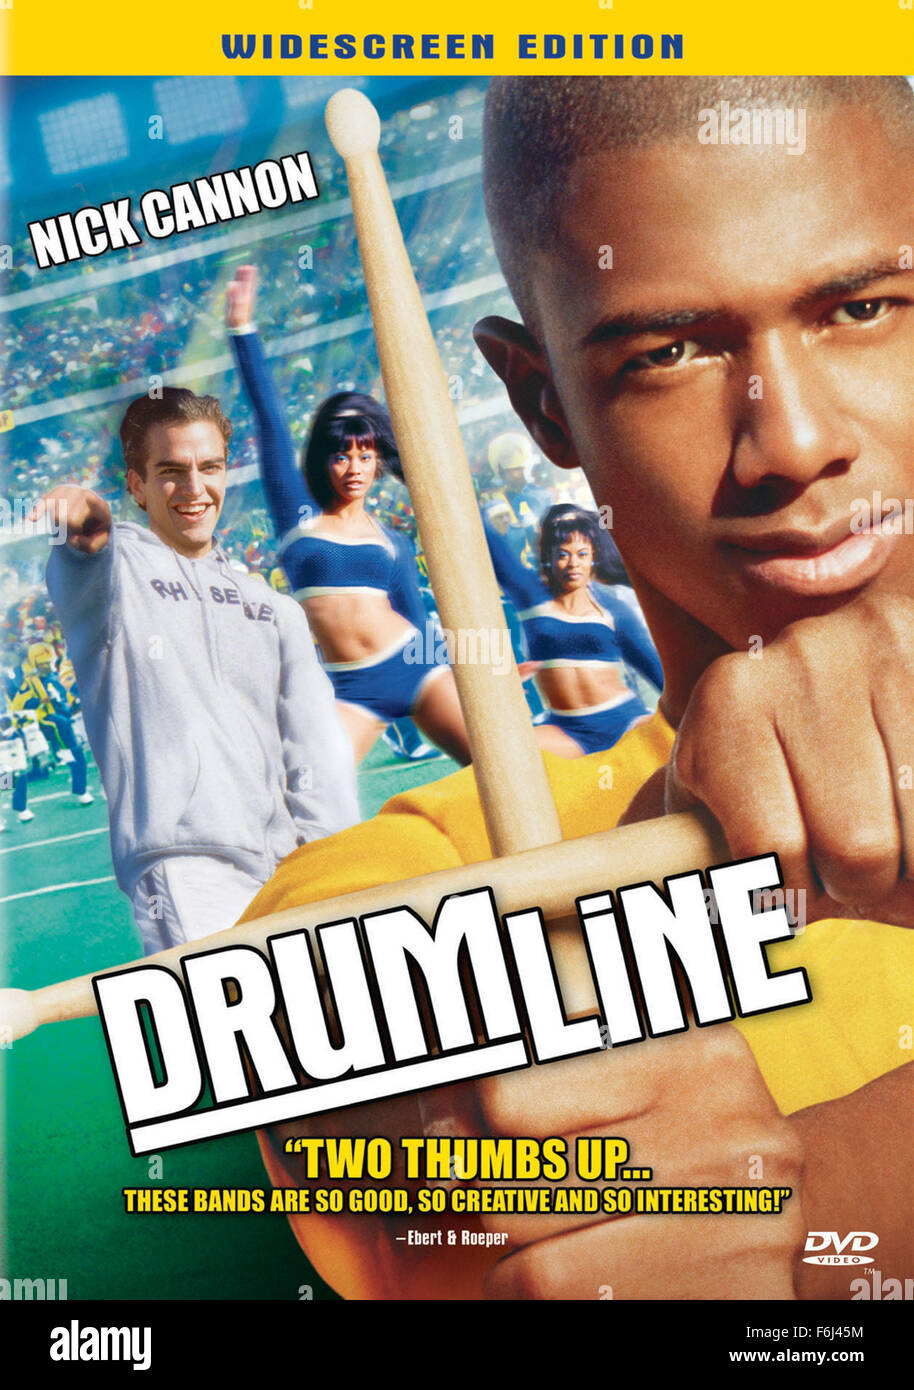 Dec 13, 2002; Los Angeles, CA, USA; Poster art for the Fox 2000 Pictures movie, 'Drumline.' starring NICK CANNON as Devon and Orlando Jones as Dr. Lee. Directed by Charles Stone III. Mandatory Credit: Photo by Fox 2000 Pictures. (c) Copyright 2002 by Courtesy of Fox 2000 Pictures Stock Photo